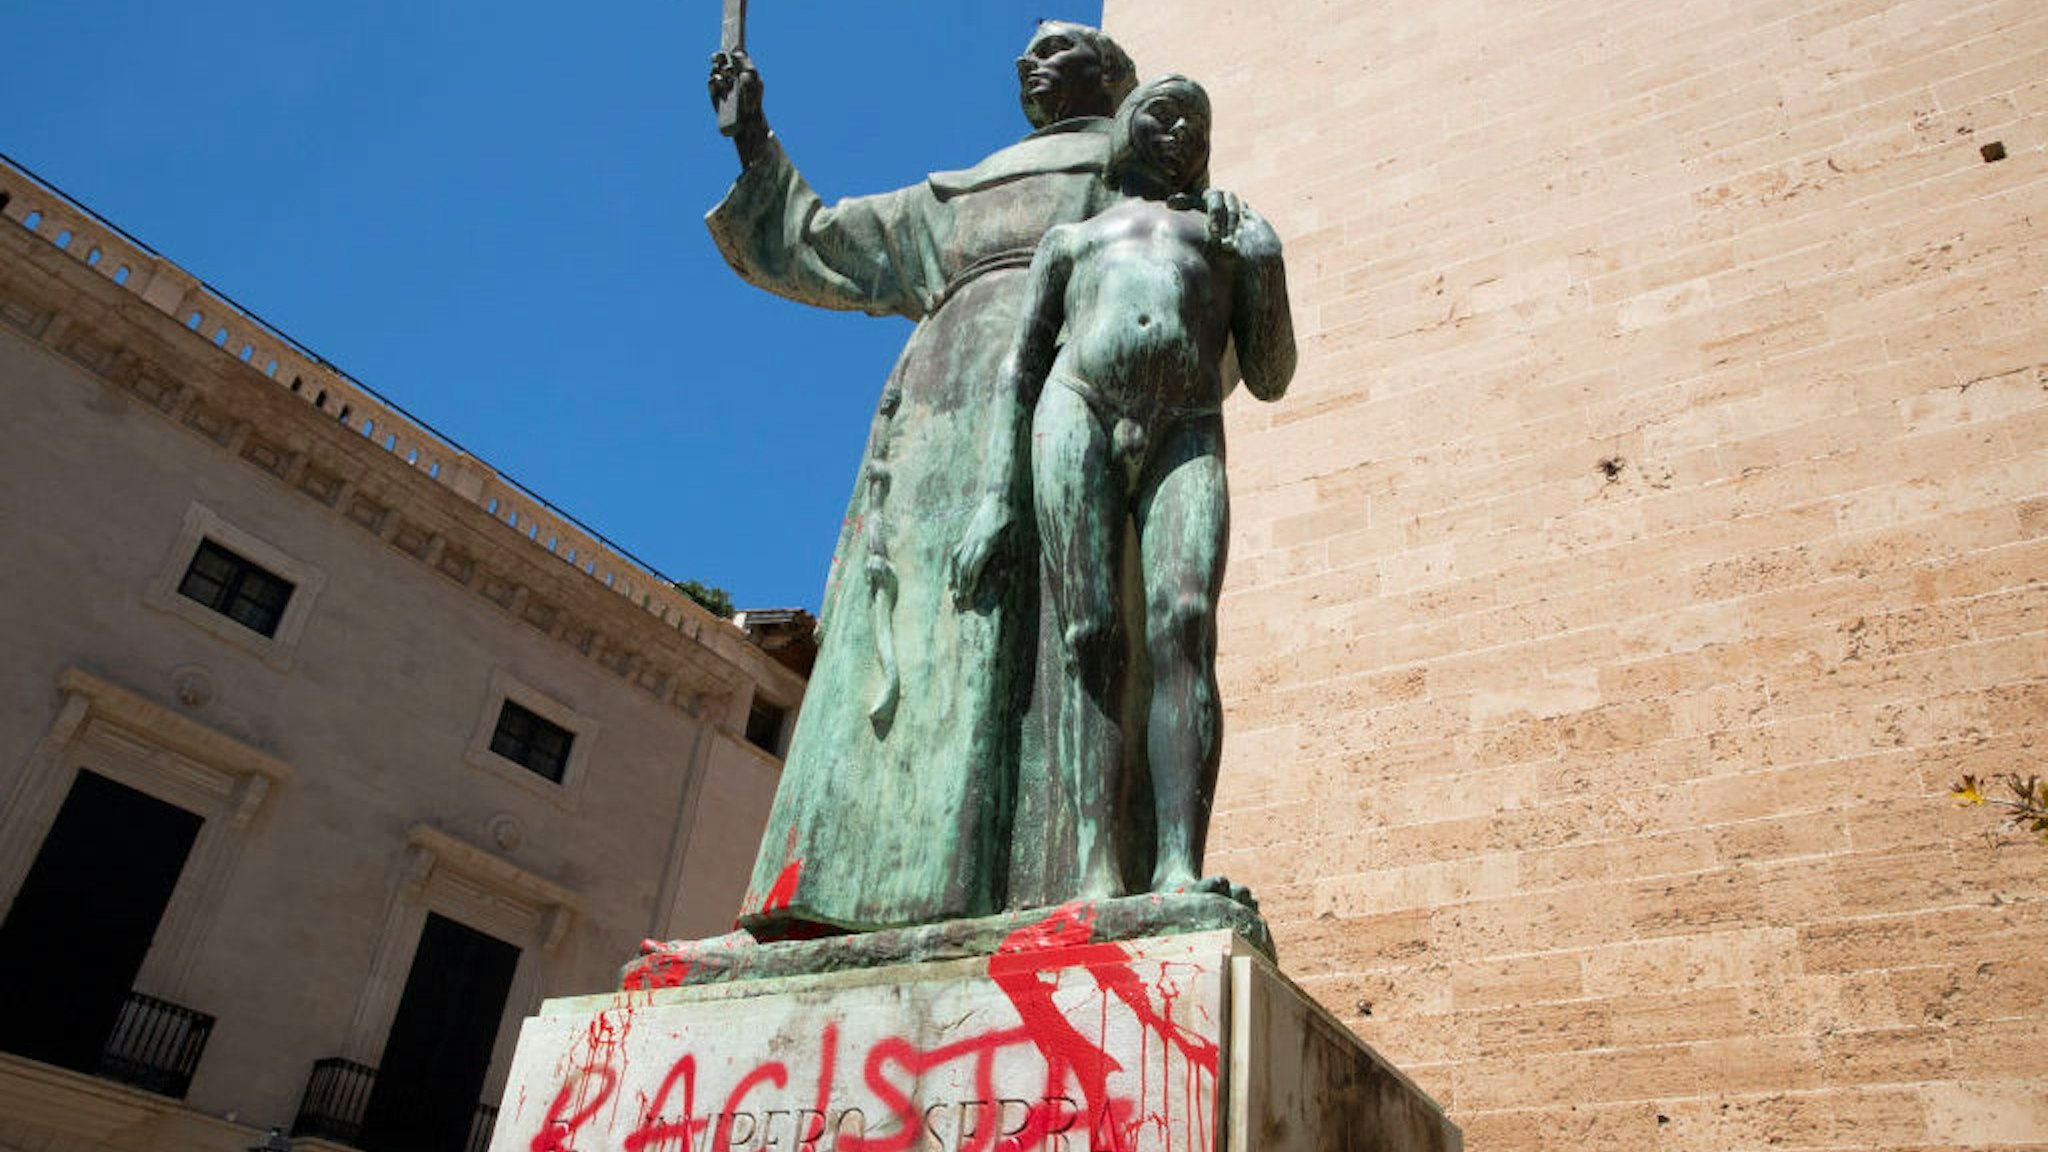 The statue of the Roman Catholic Spanish priest Junipero Serra is pictured in Palma de Mallorca on June 22, 2020, after it was daubed with graffiti reading "Racist". - The protests against racial inequality and police brutality have seen the toppling or removal of statues depicting Confederate generals, colonial figures and slave traders in the United States, Britain and New Zealand. (Photo by JAIME REINA / AFP) (Photo by JAIME REINA/AFP via Getty Images)